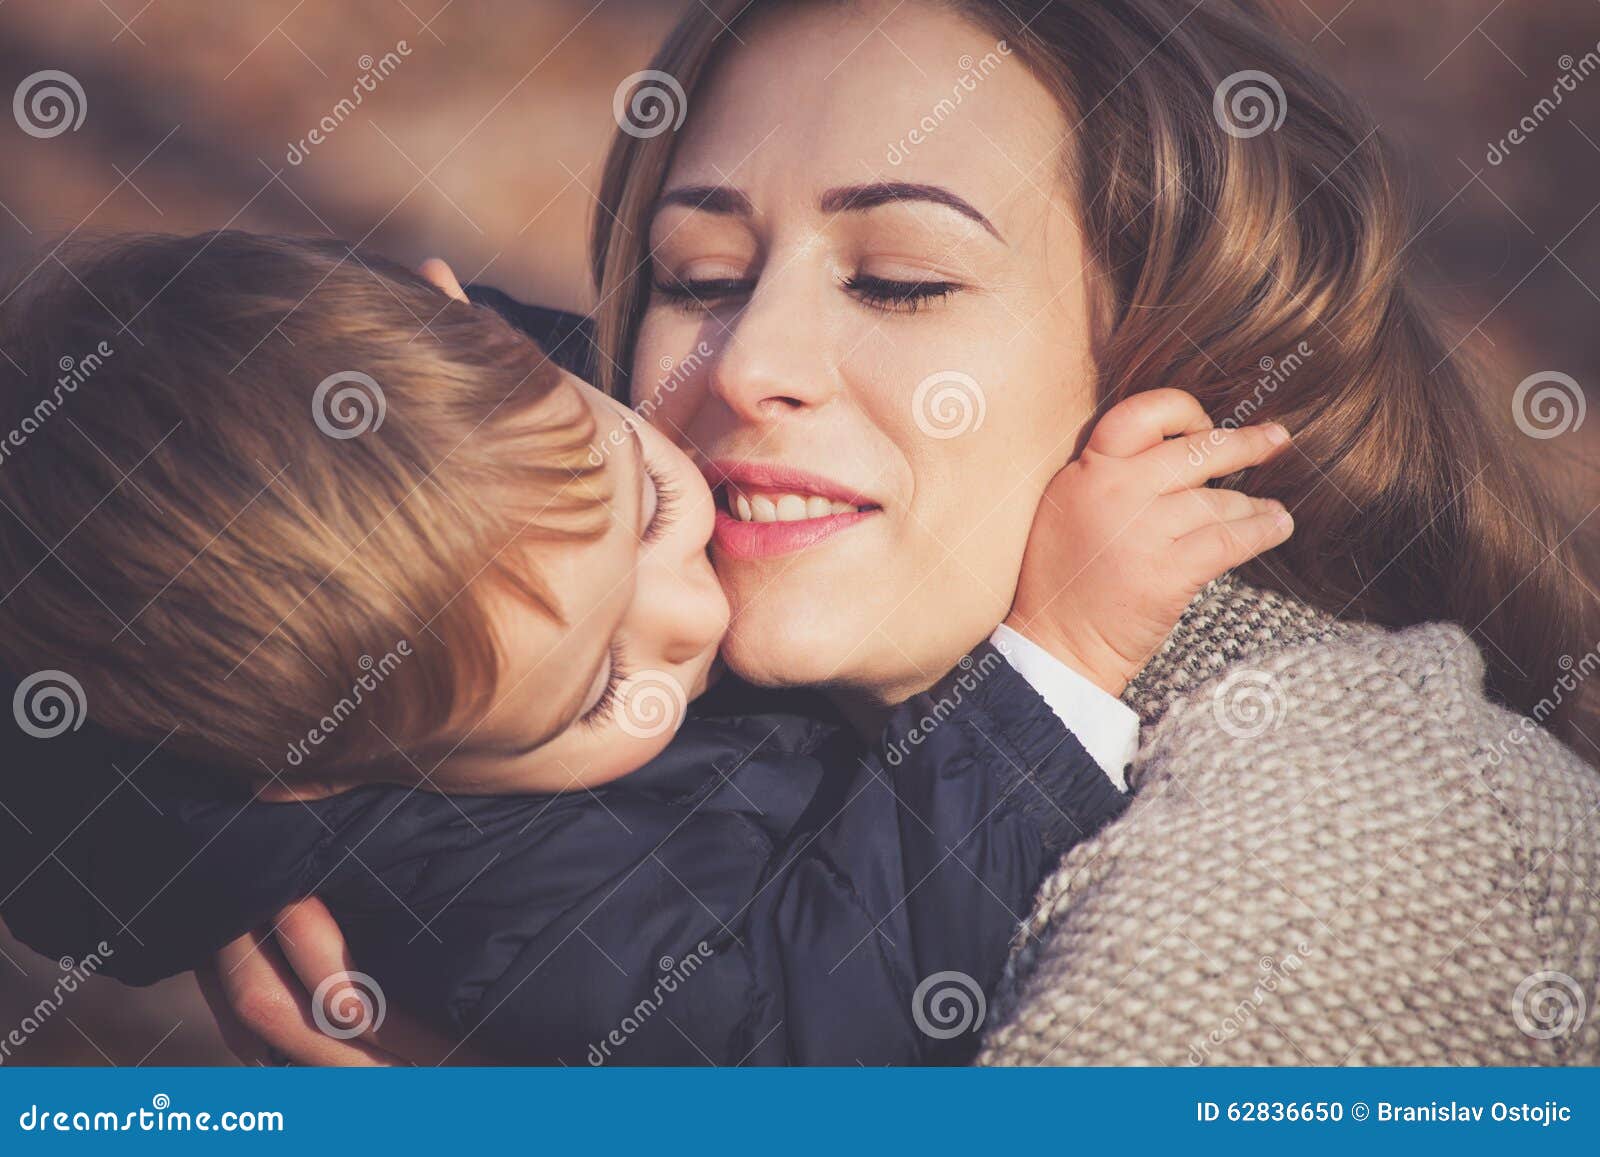 Son And Mom In Hug Stock Photo Image Of Focus Happ